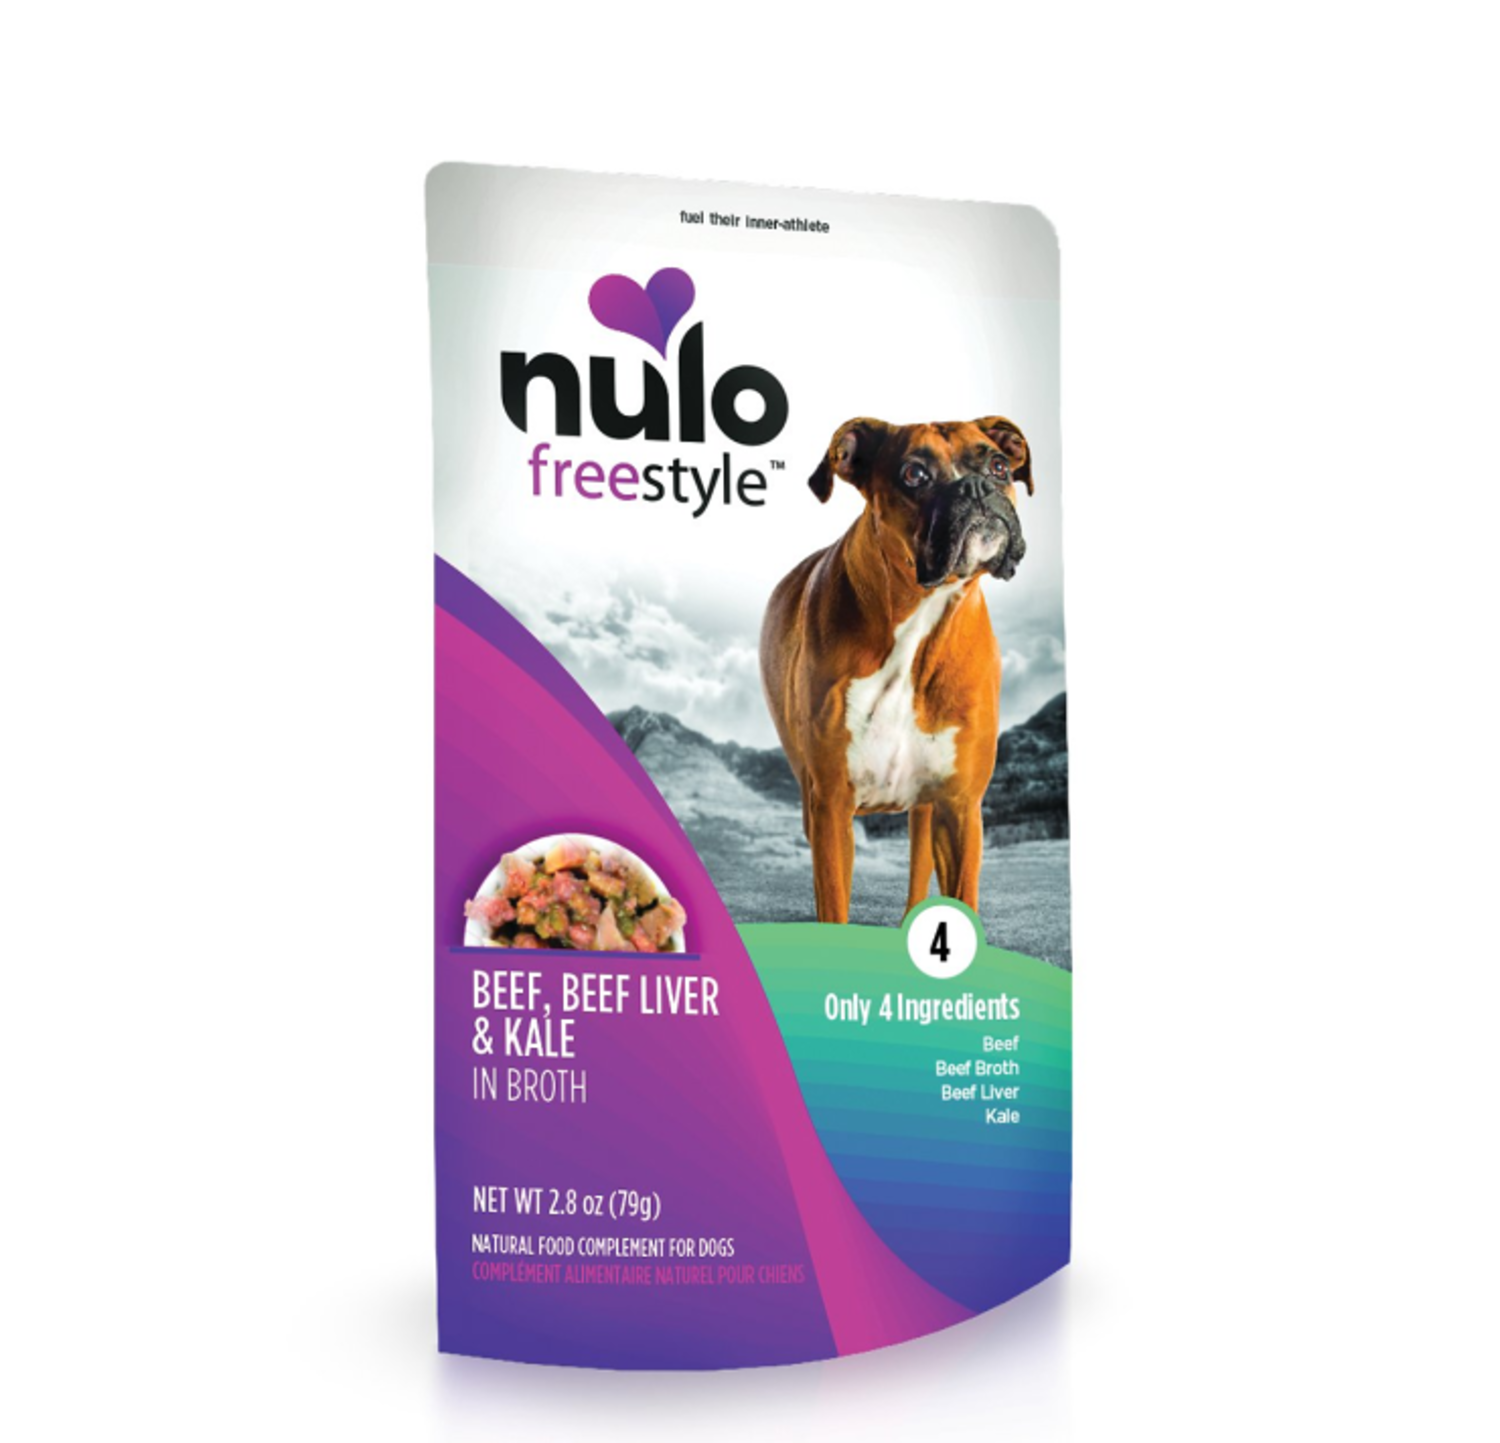 is nulo a good dog food brand